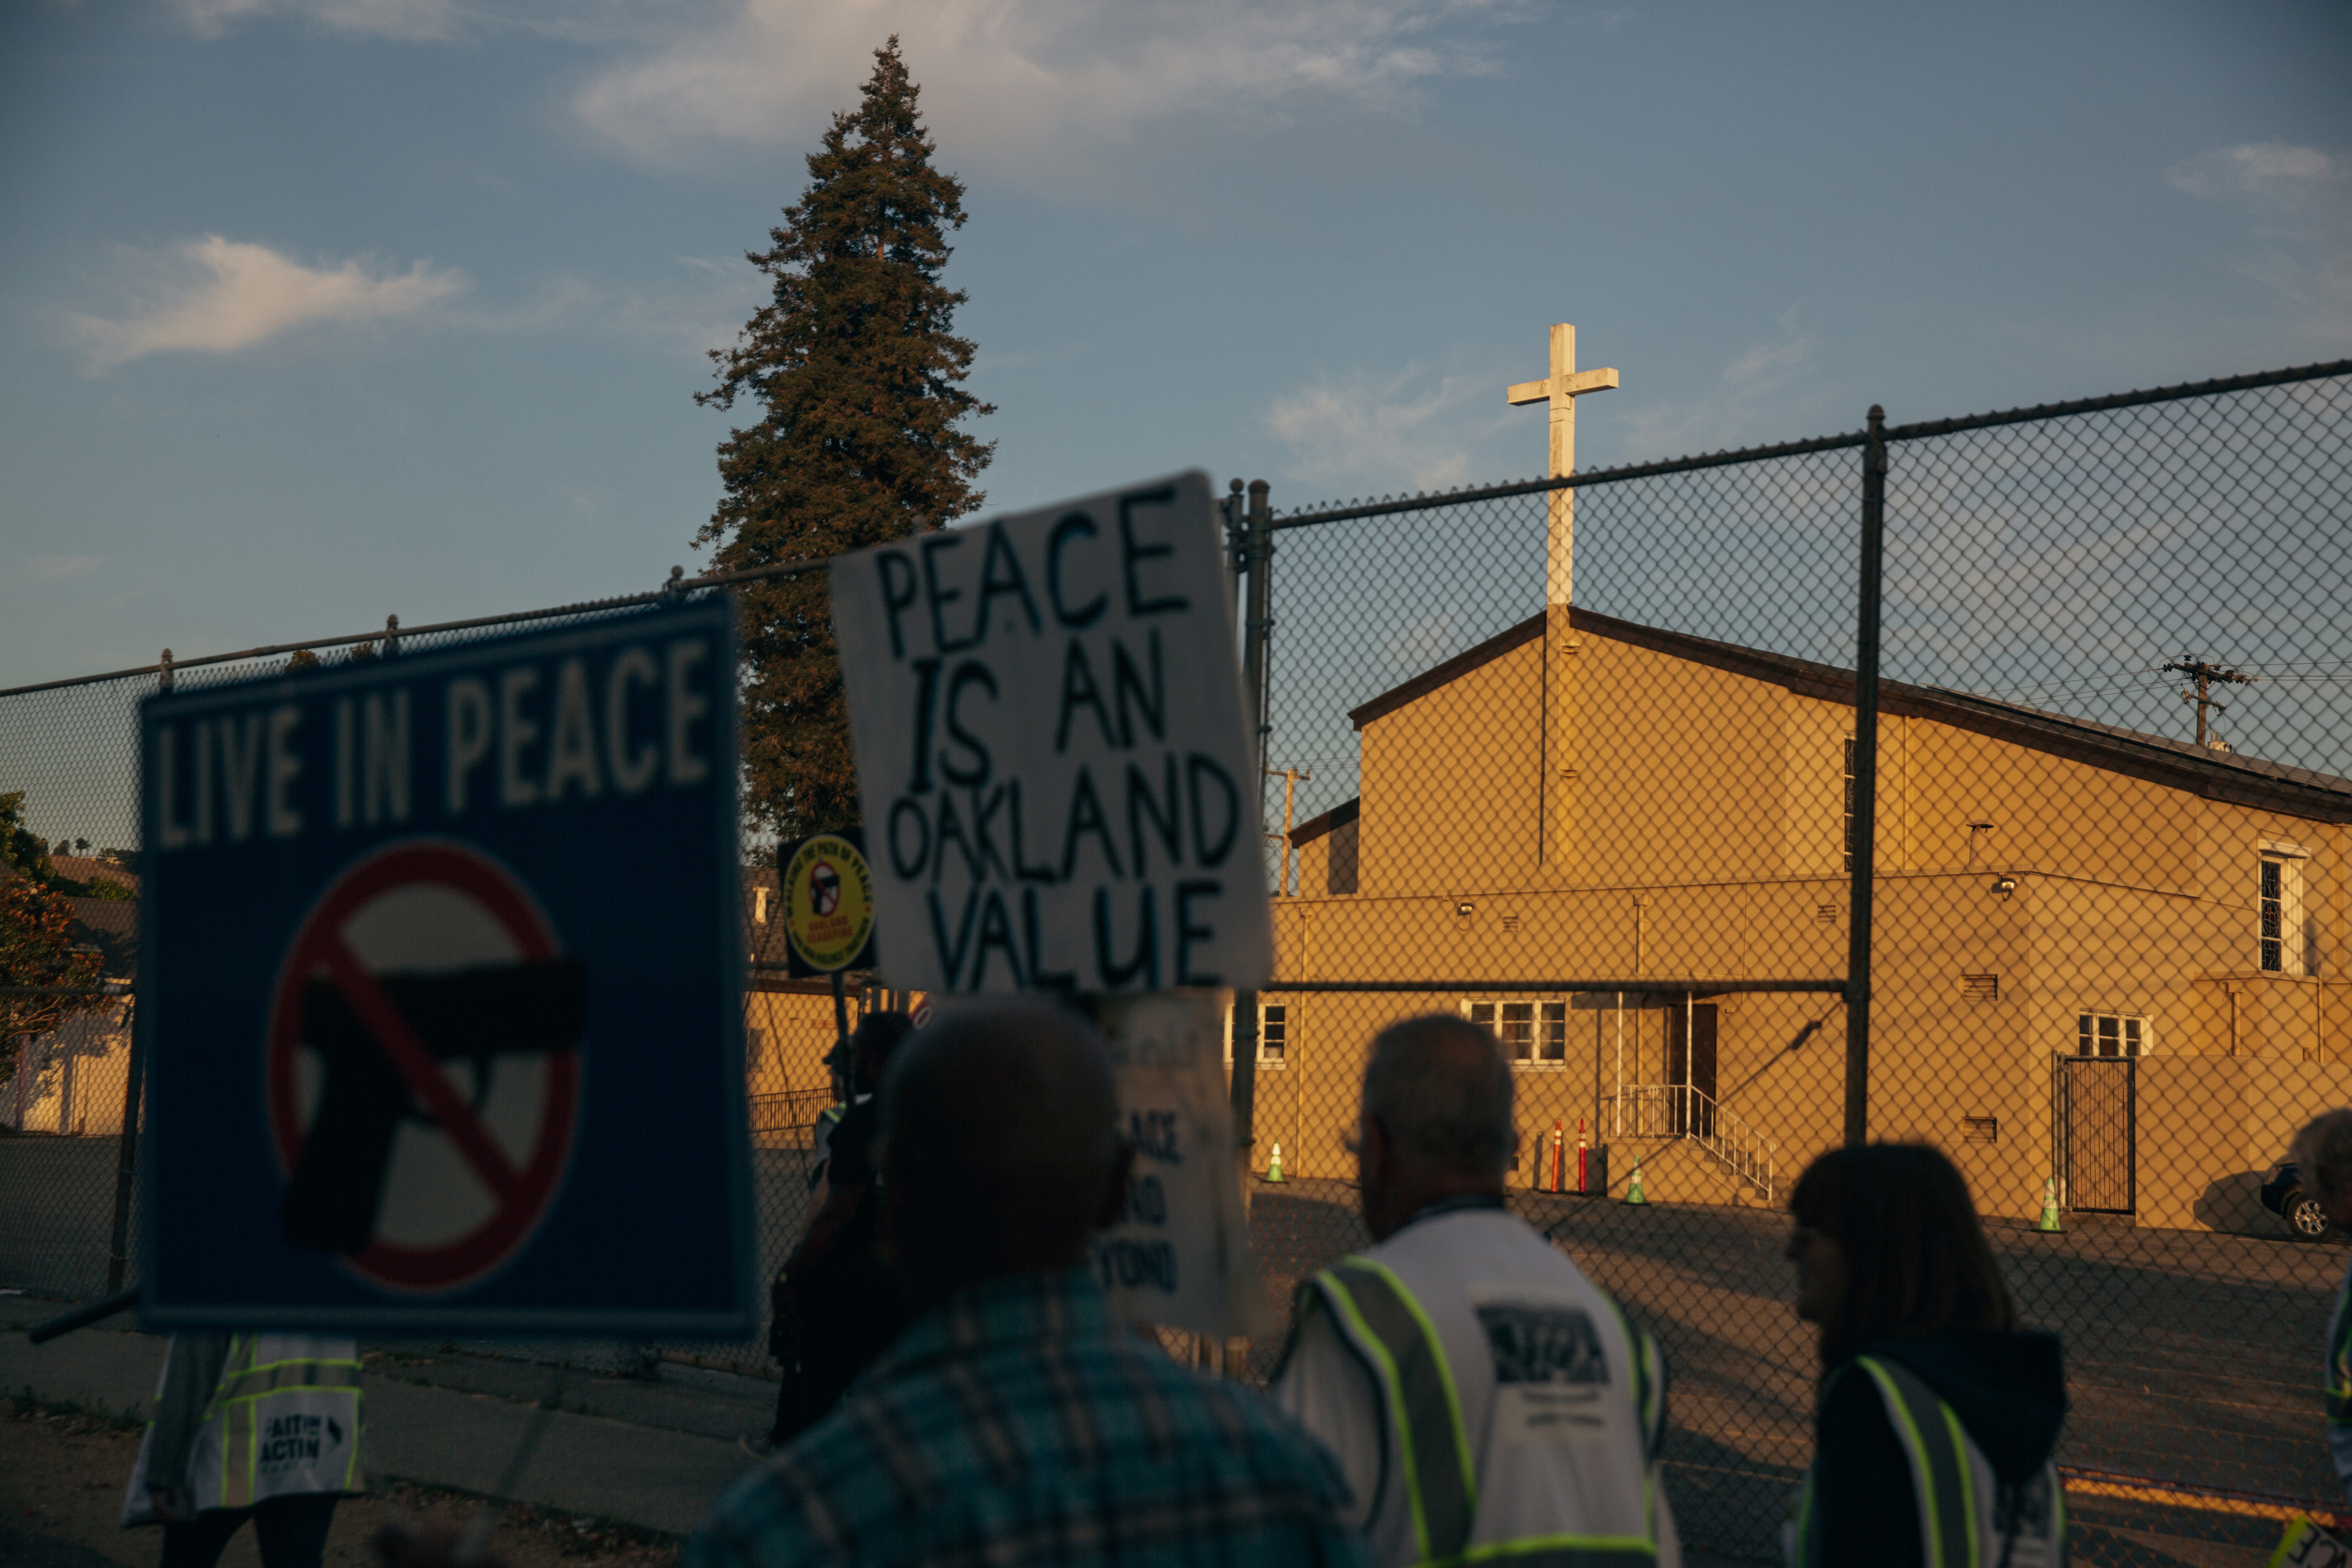 People walk past a church. Some wear reflective vests and some carry signs that read "Live in Peace" and "Peace is an Oakland value".